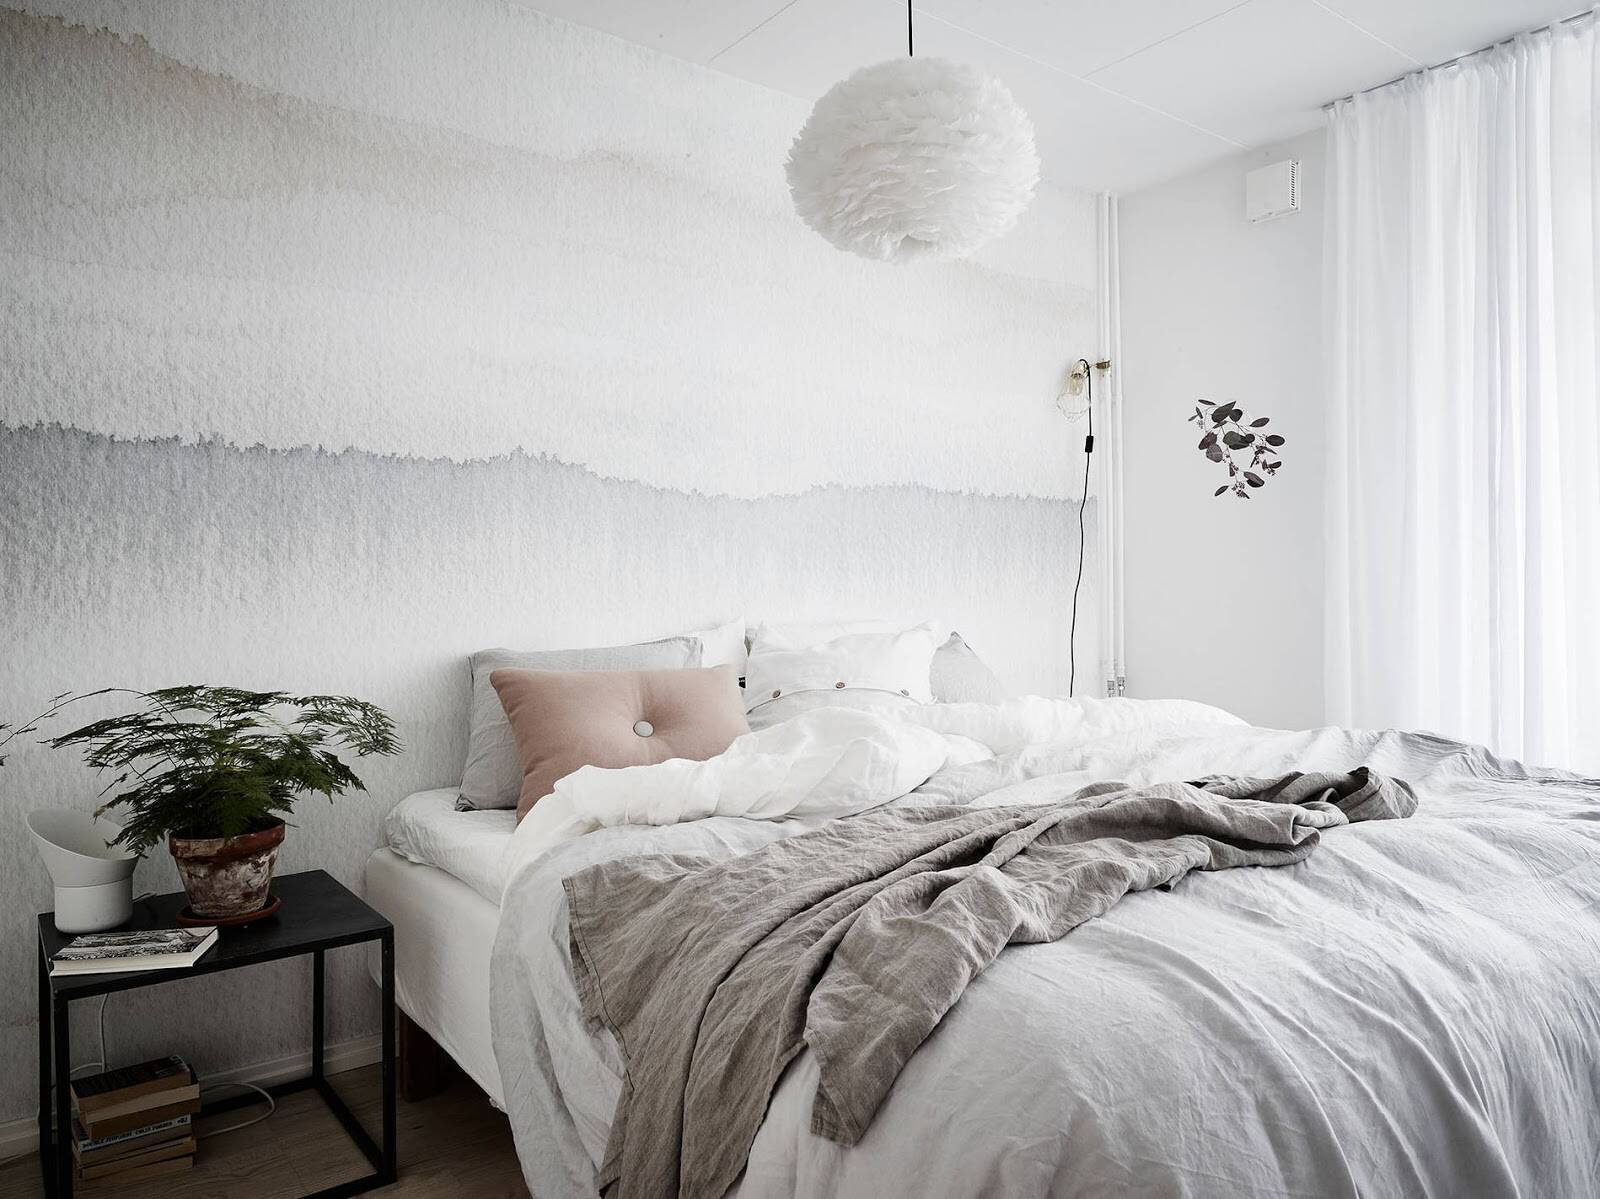 A Scandinavian bedroom is cozy, transparent, and sophisticated.